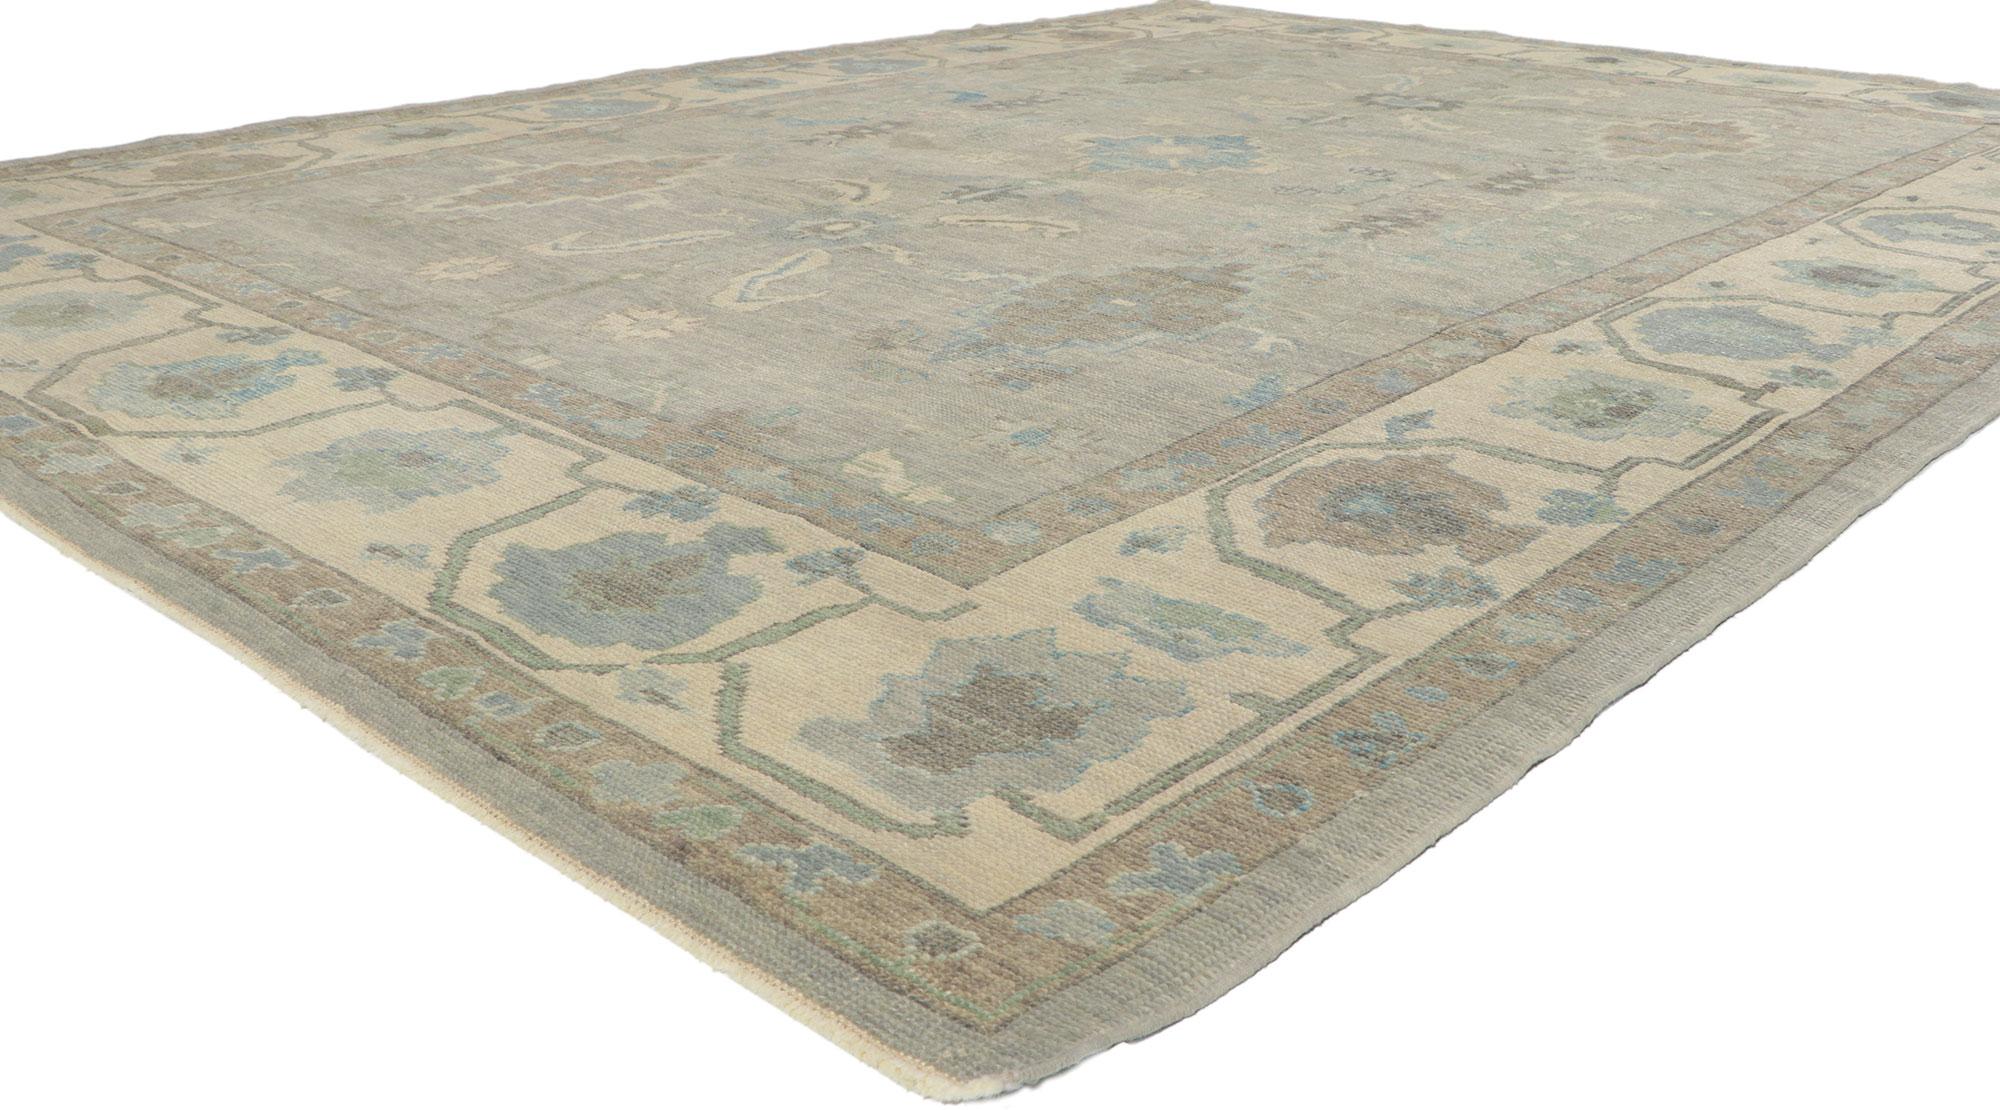 53815 New Turkish Oushak rug with Modern Style, 09'02 x 12'01. Polished and playful, this hand-knotted wool contemporary Turkish Oushak rug beautifully embodies a modern style. The abrashed bluish-grayish field features an array of Harshang motifs,